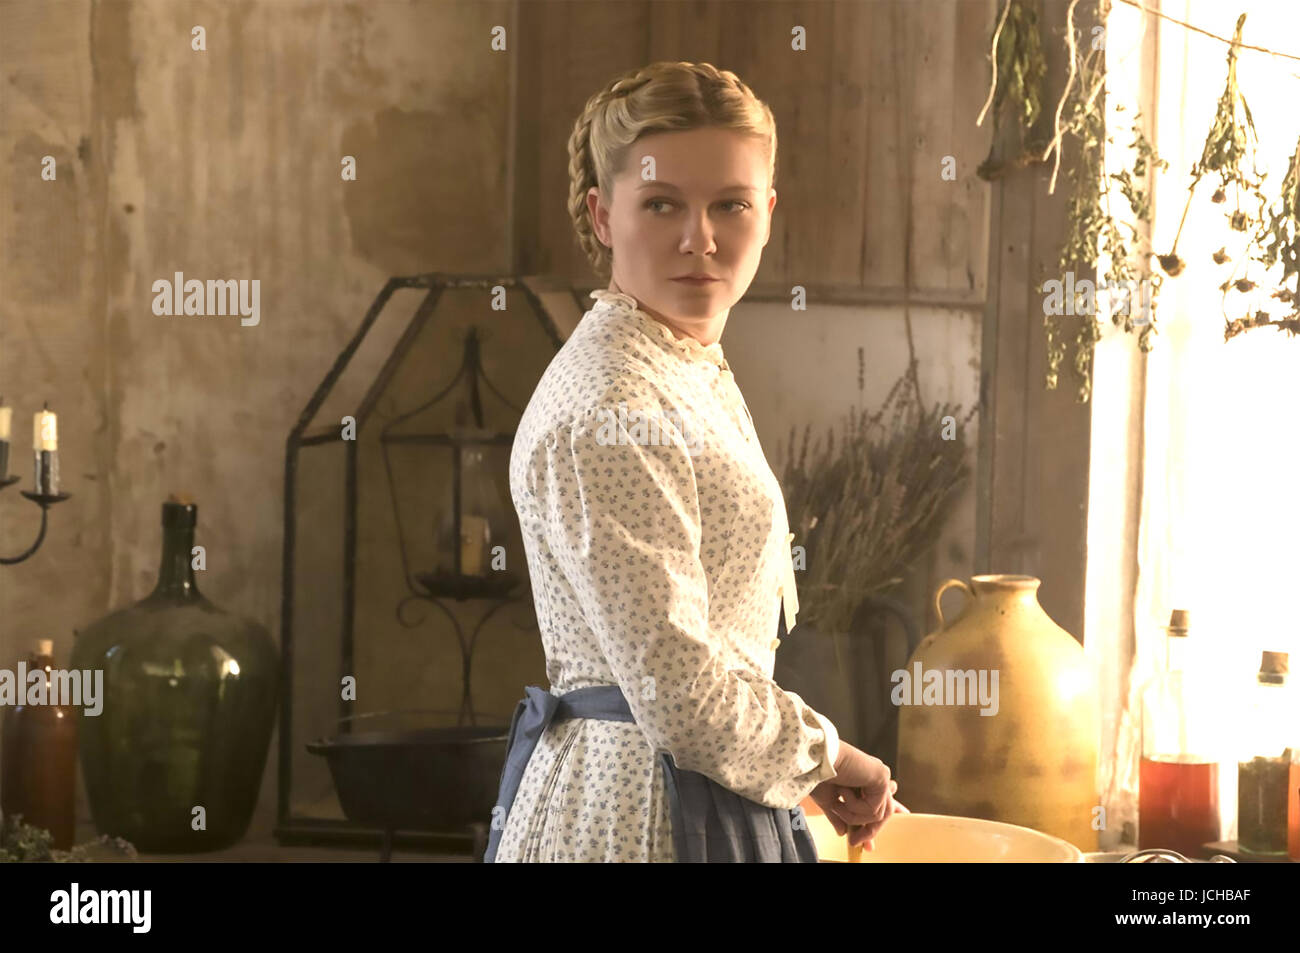 THE BEGUILED 2017 American Zoetrope film with Kirsten Dunstl Stock Photo